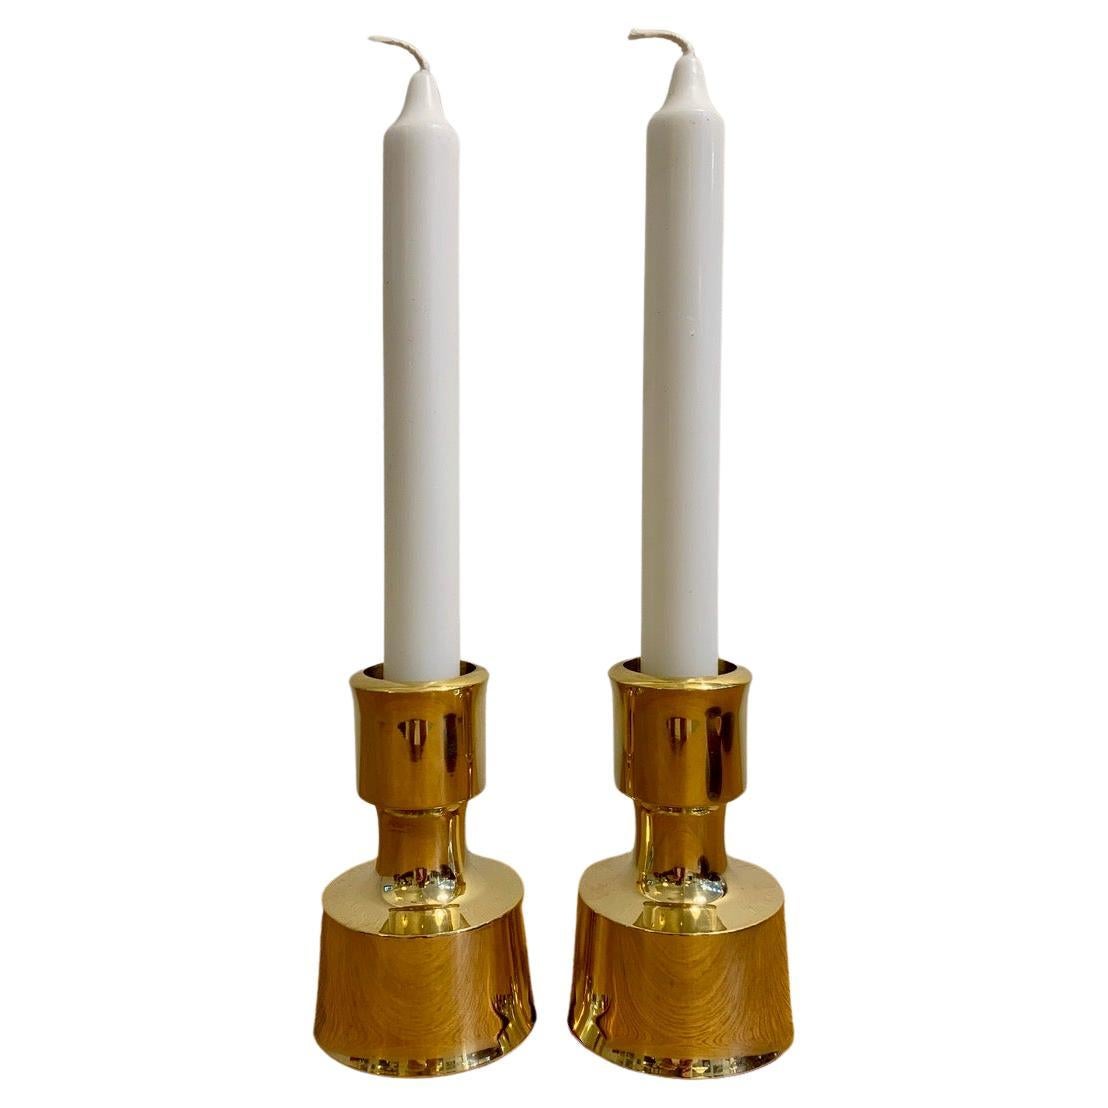 Pair of Solid Brass Candle Holders by Jens H. Quistgaard for Dansk Designs 1963